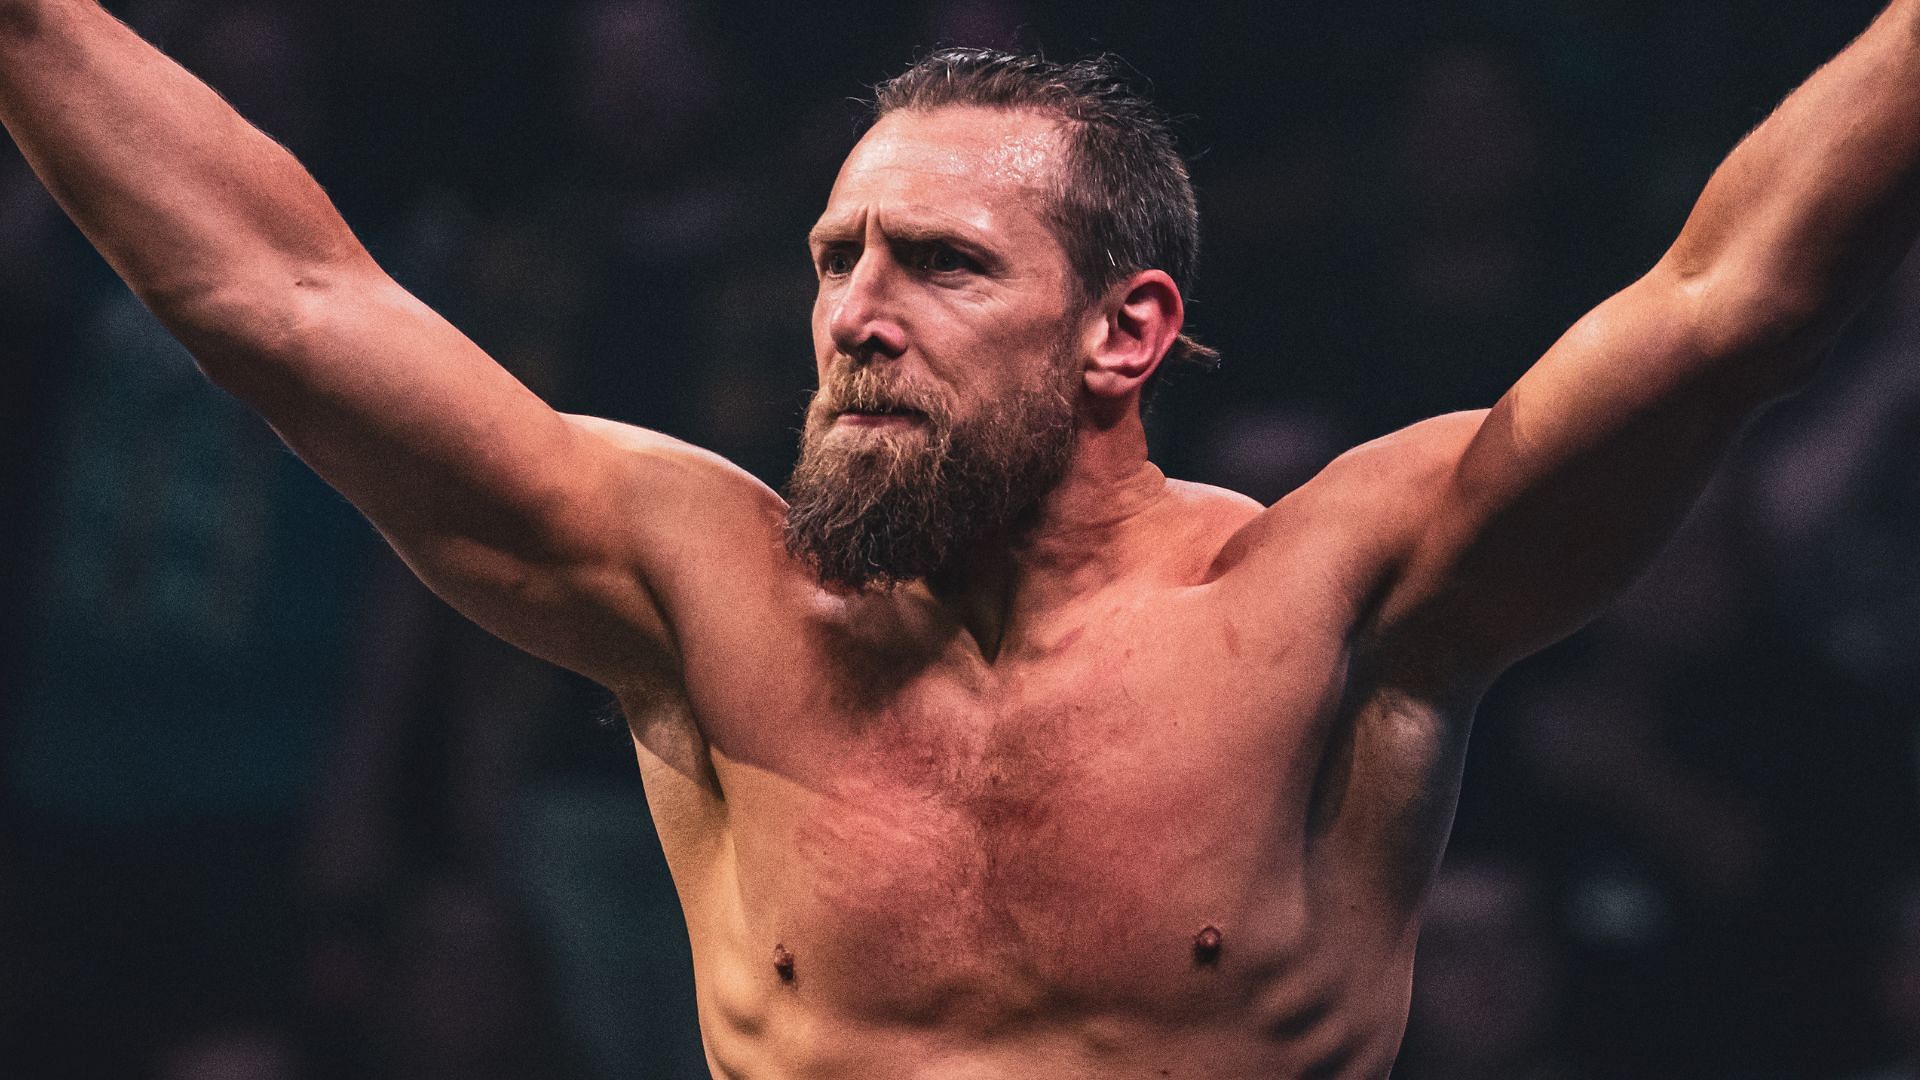 Bryan Danielson has got a list of opponents he wants to face